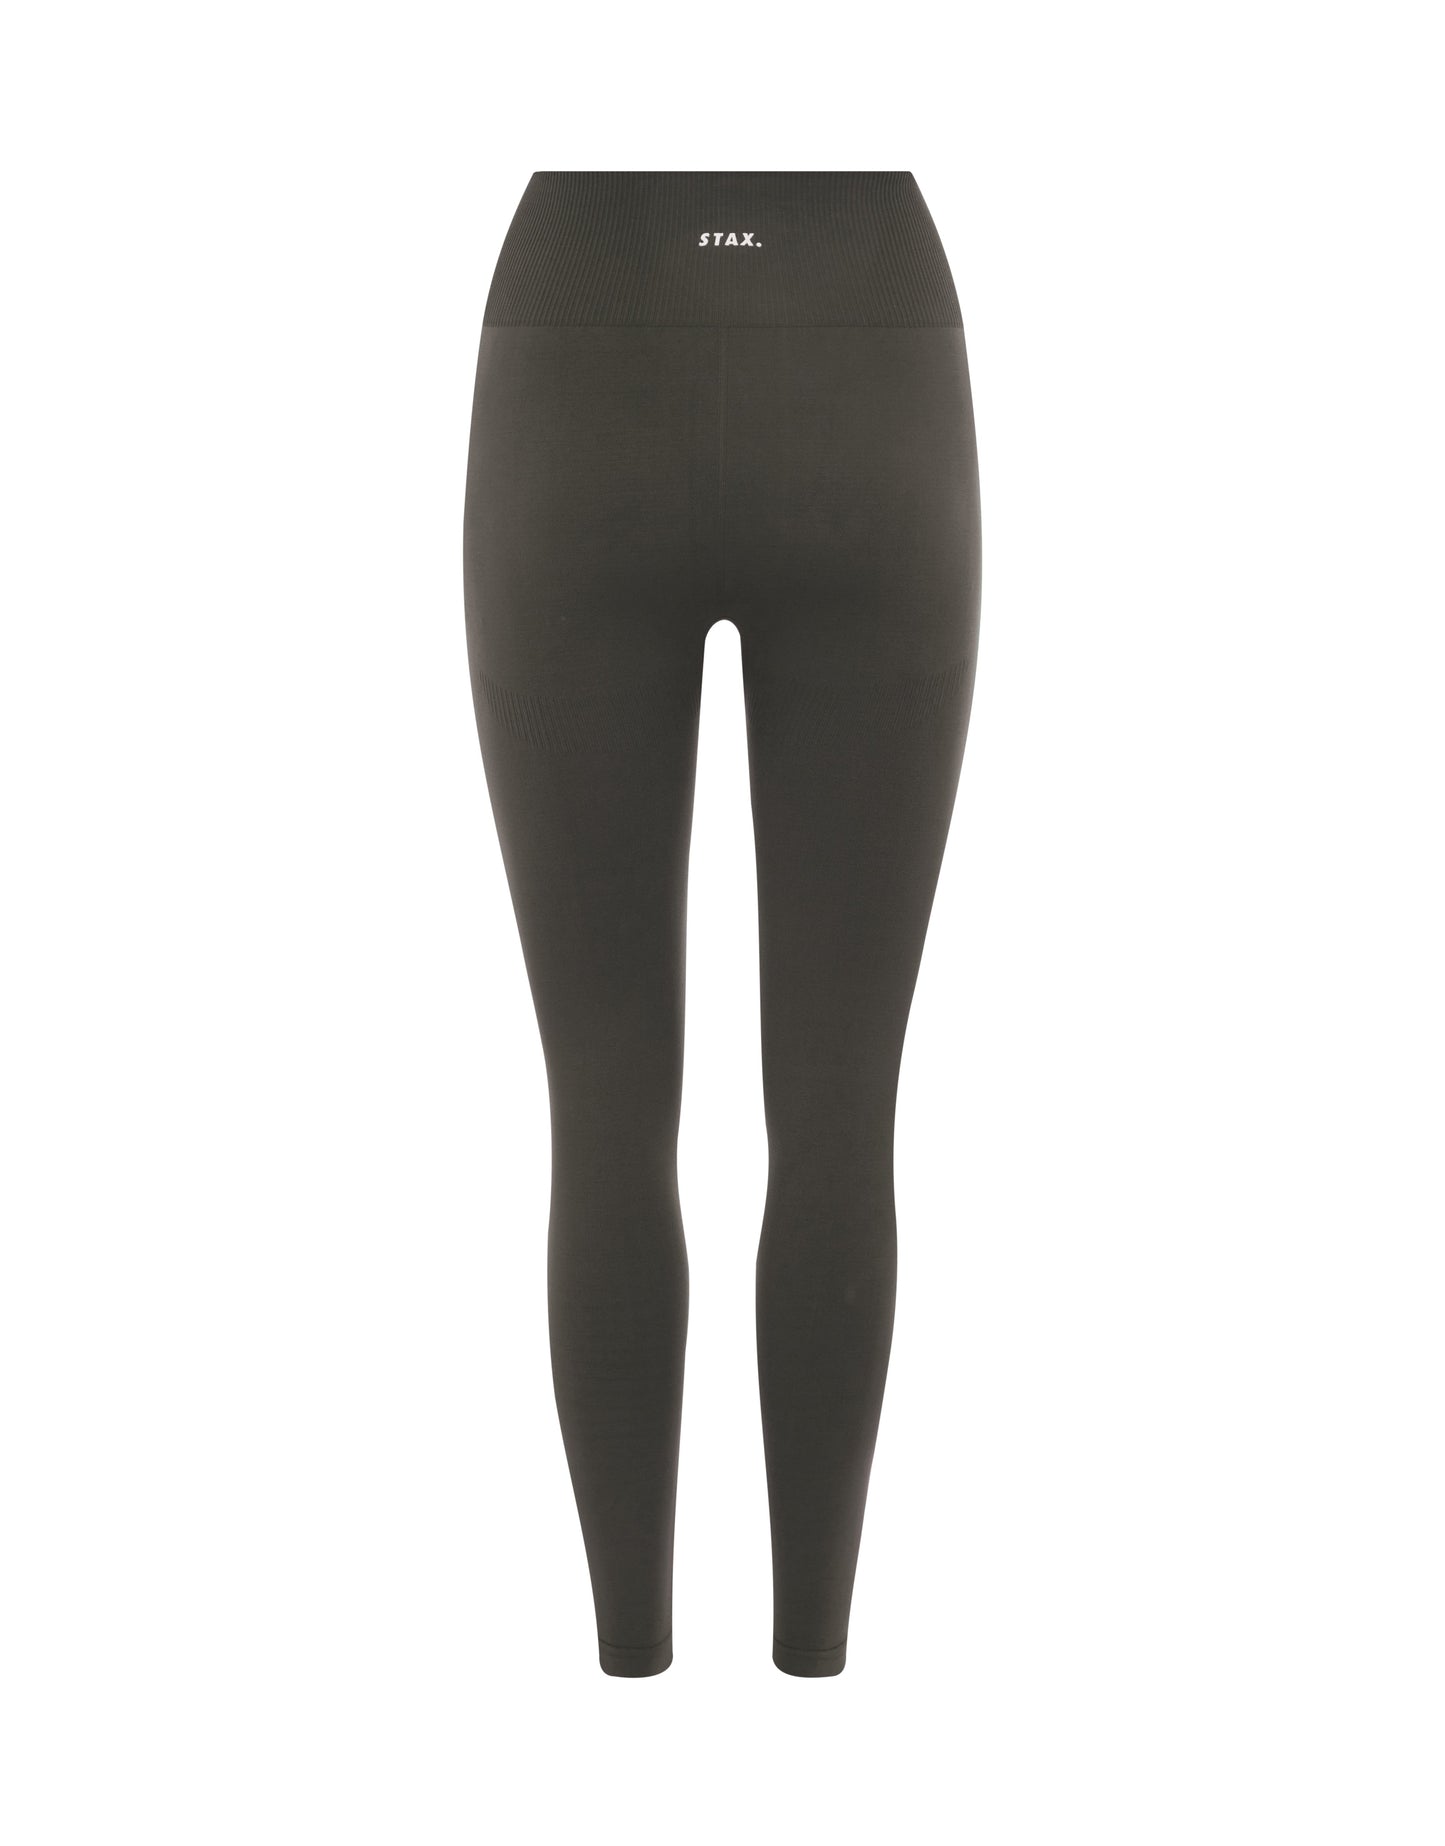 STAX. PSF Full Length Tights - Dovetail